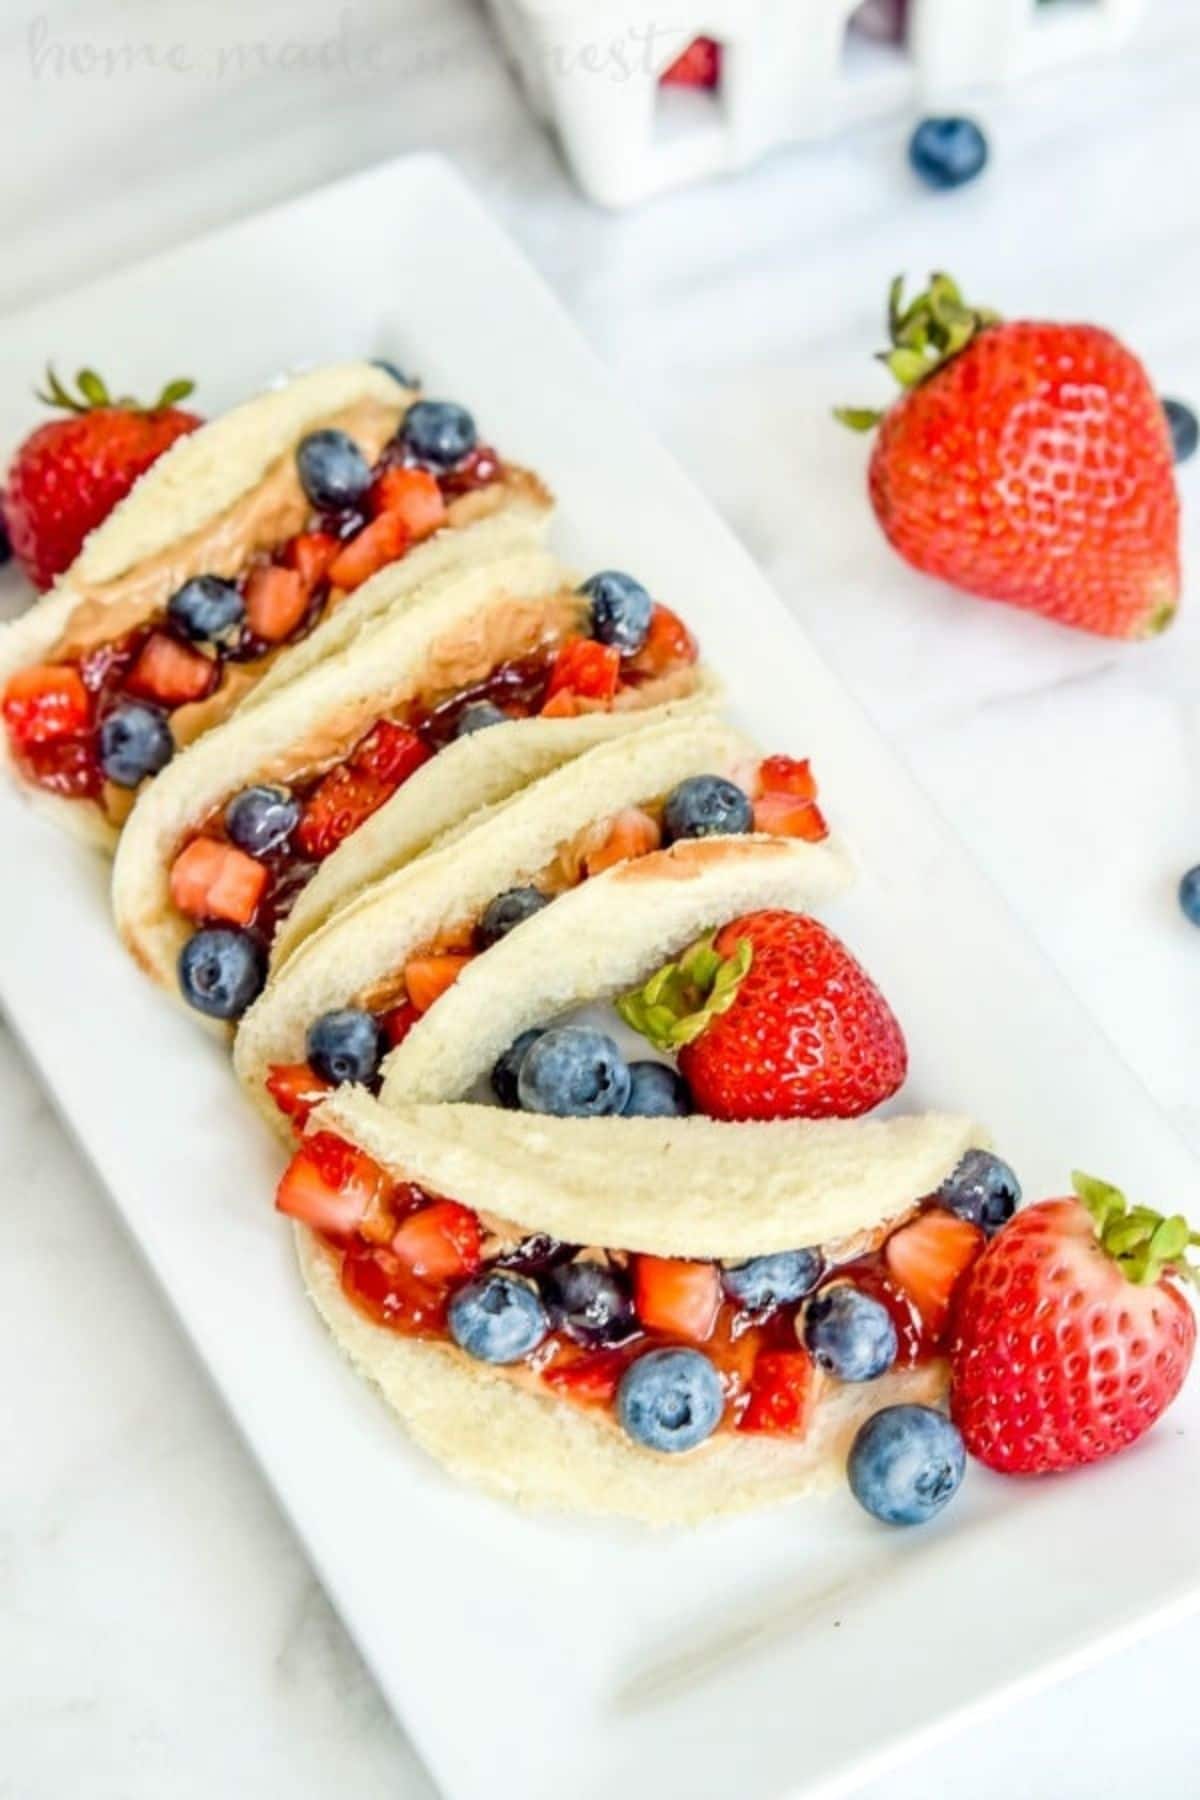 Peanut butter and jelly bread tacos with fresh fruit topping